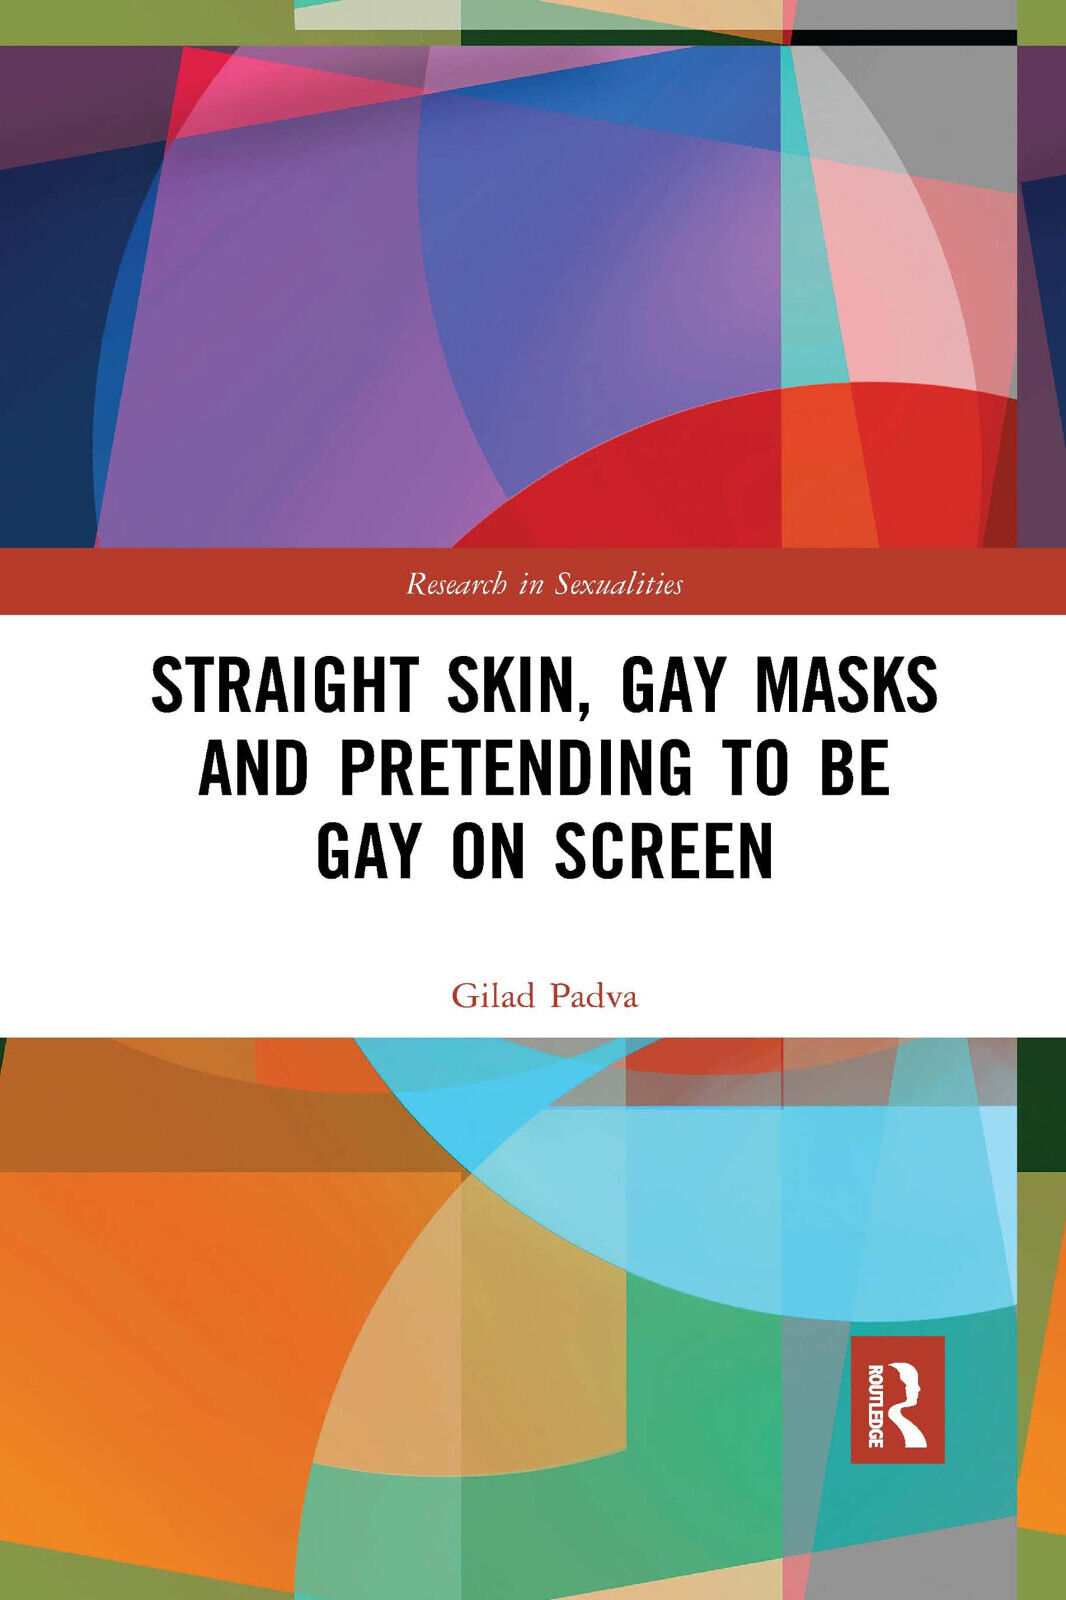 Straight Skin, Gay Masks And Pretending To Be Gay On Screen - Gilad Padva - 2022